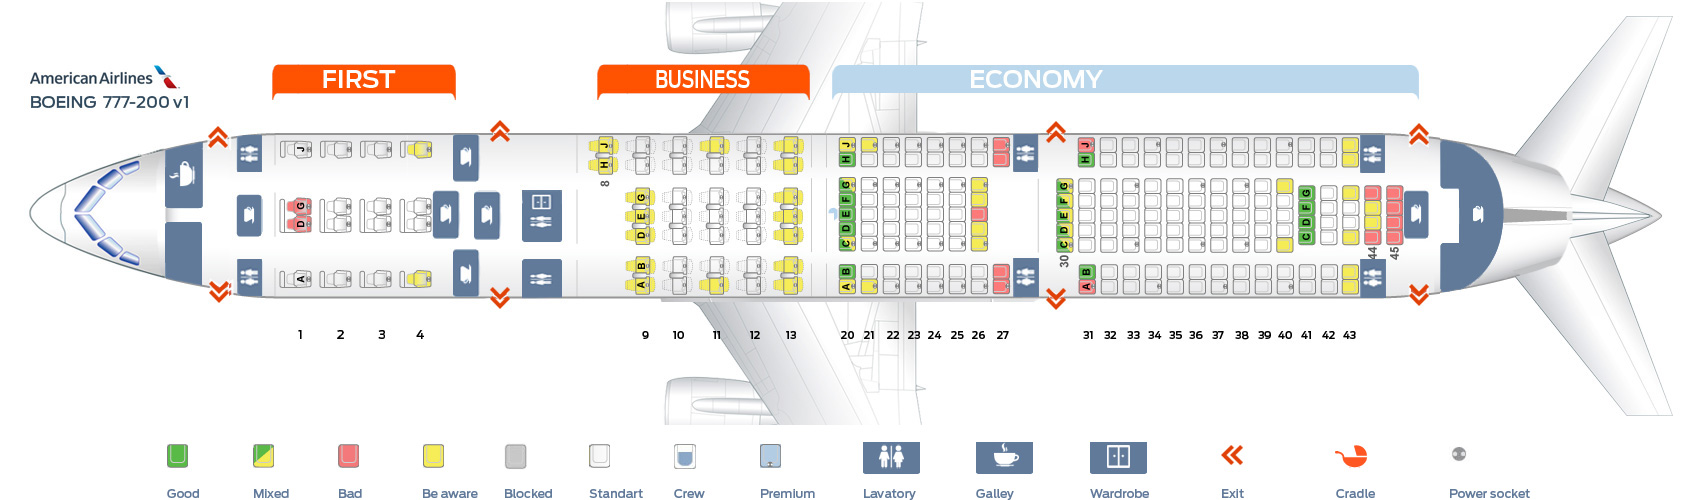 Seat_map_American_Airlines_Boeing_777-200_v1